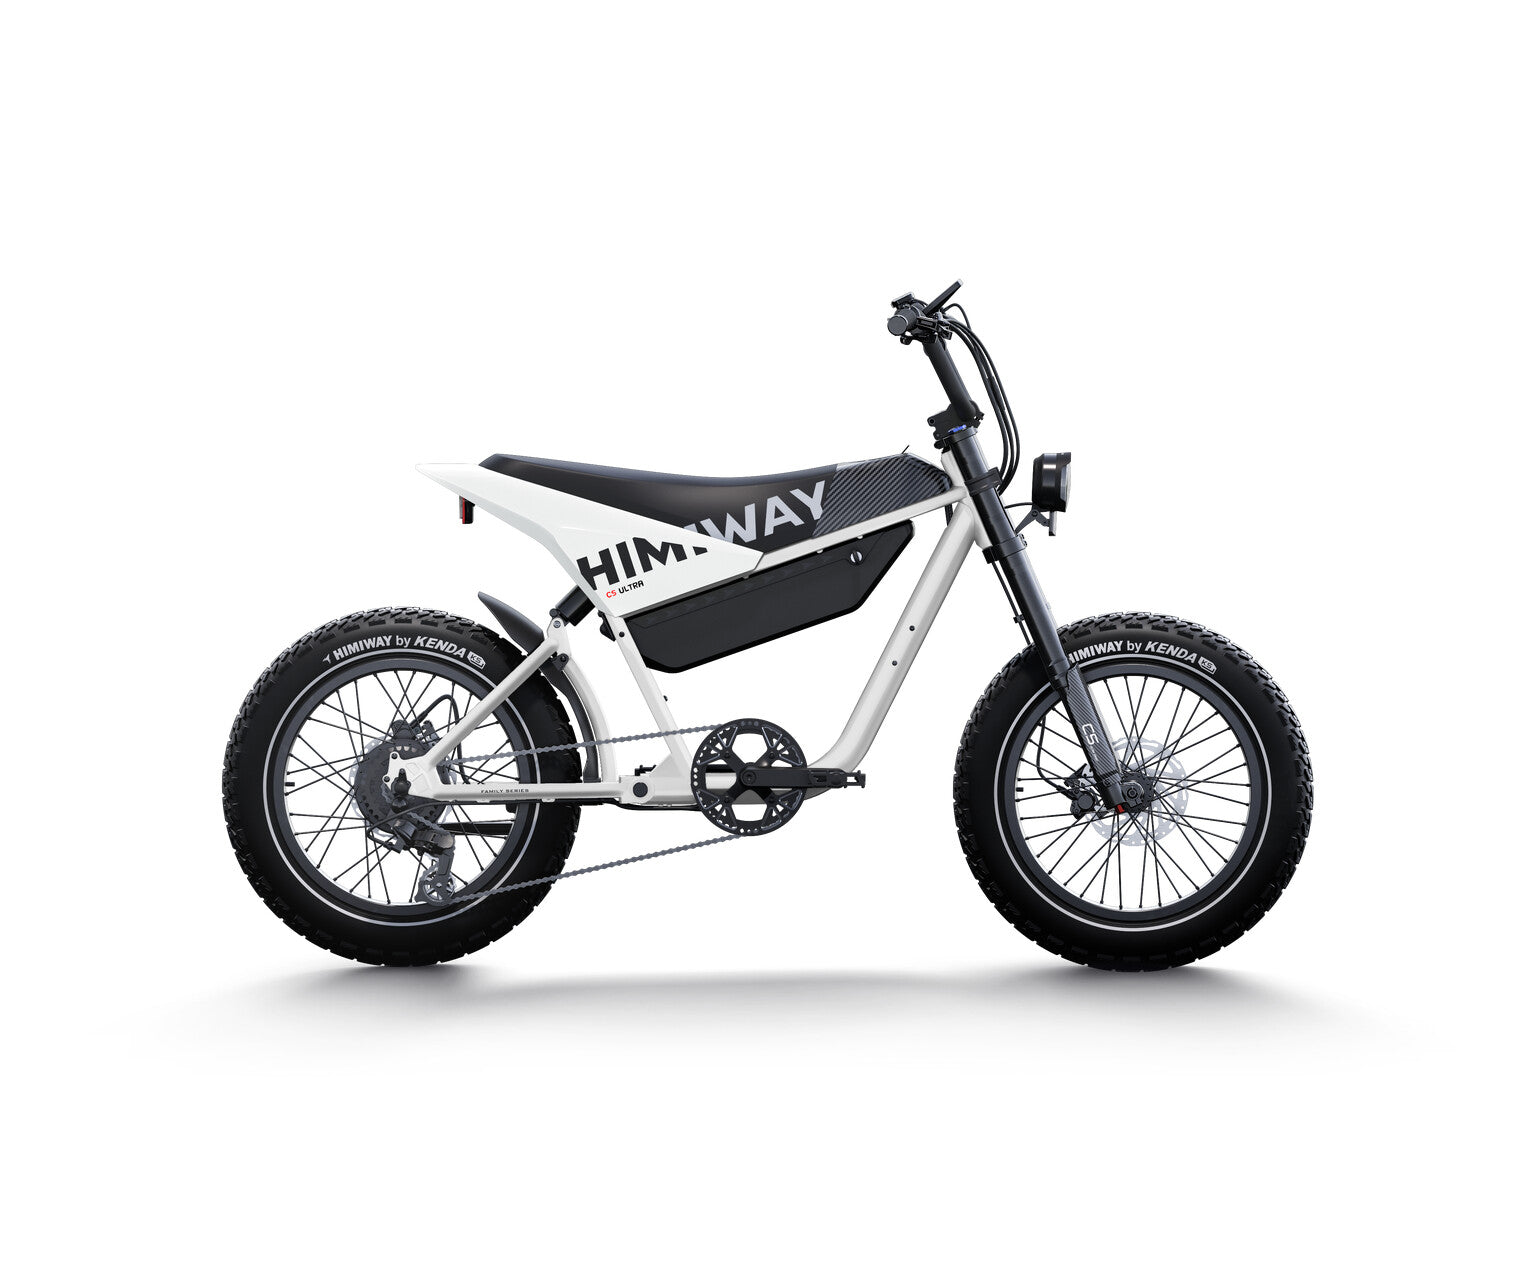 Side view of a white and black electric bike with thick tires, a battery compartment, and "Himiway" branding on the frame, featuring an advanced torque sensor for precise control. The Himiway - C5 electric motorcycle boasts an extended range for longer rides.